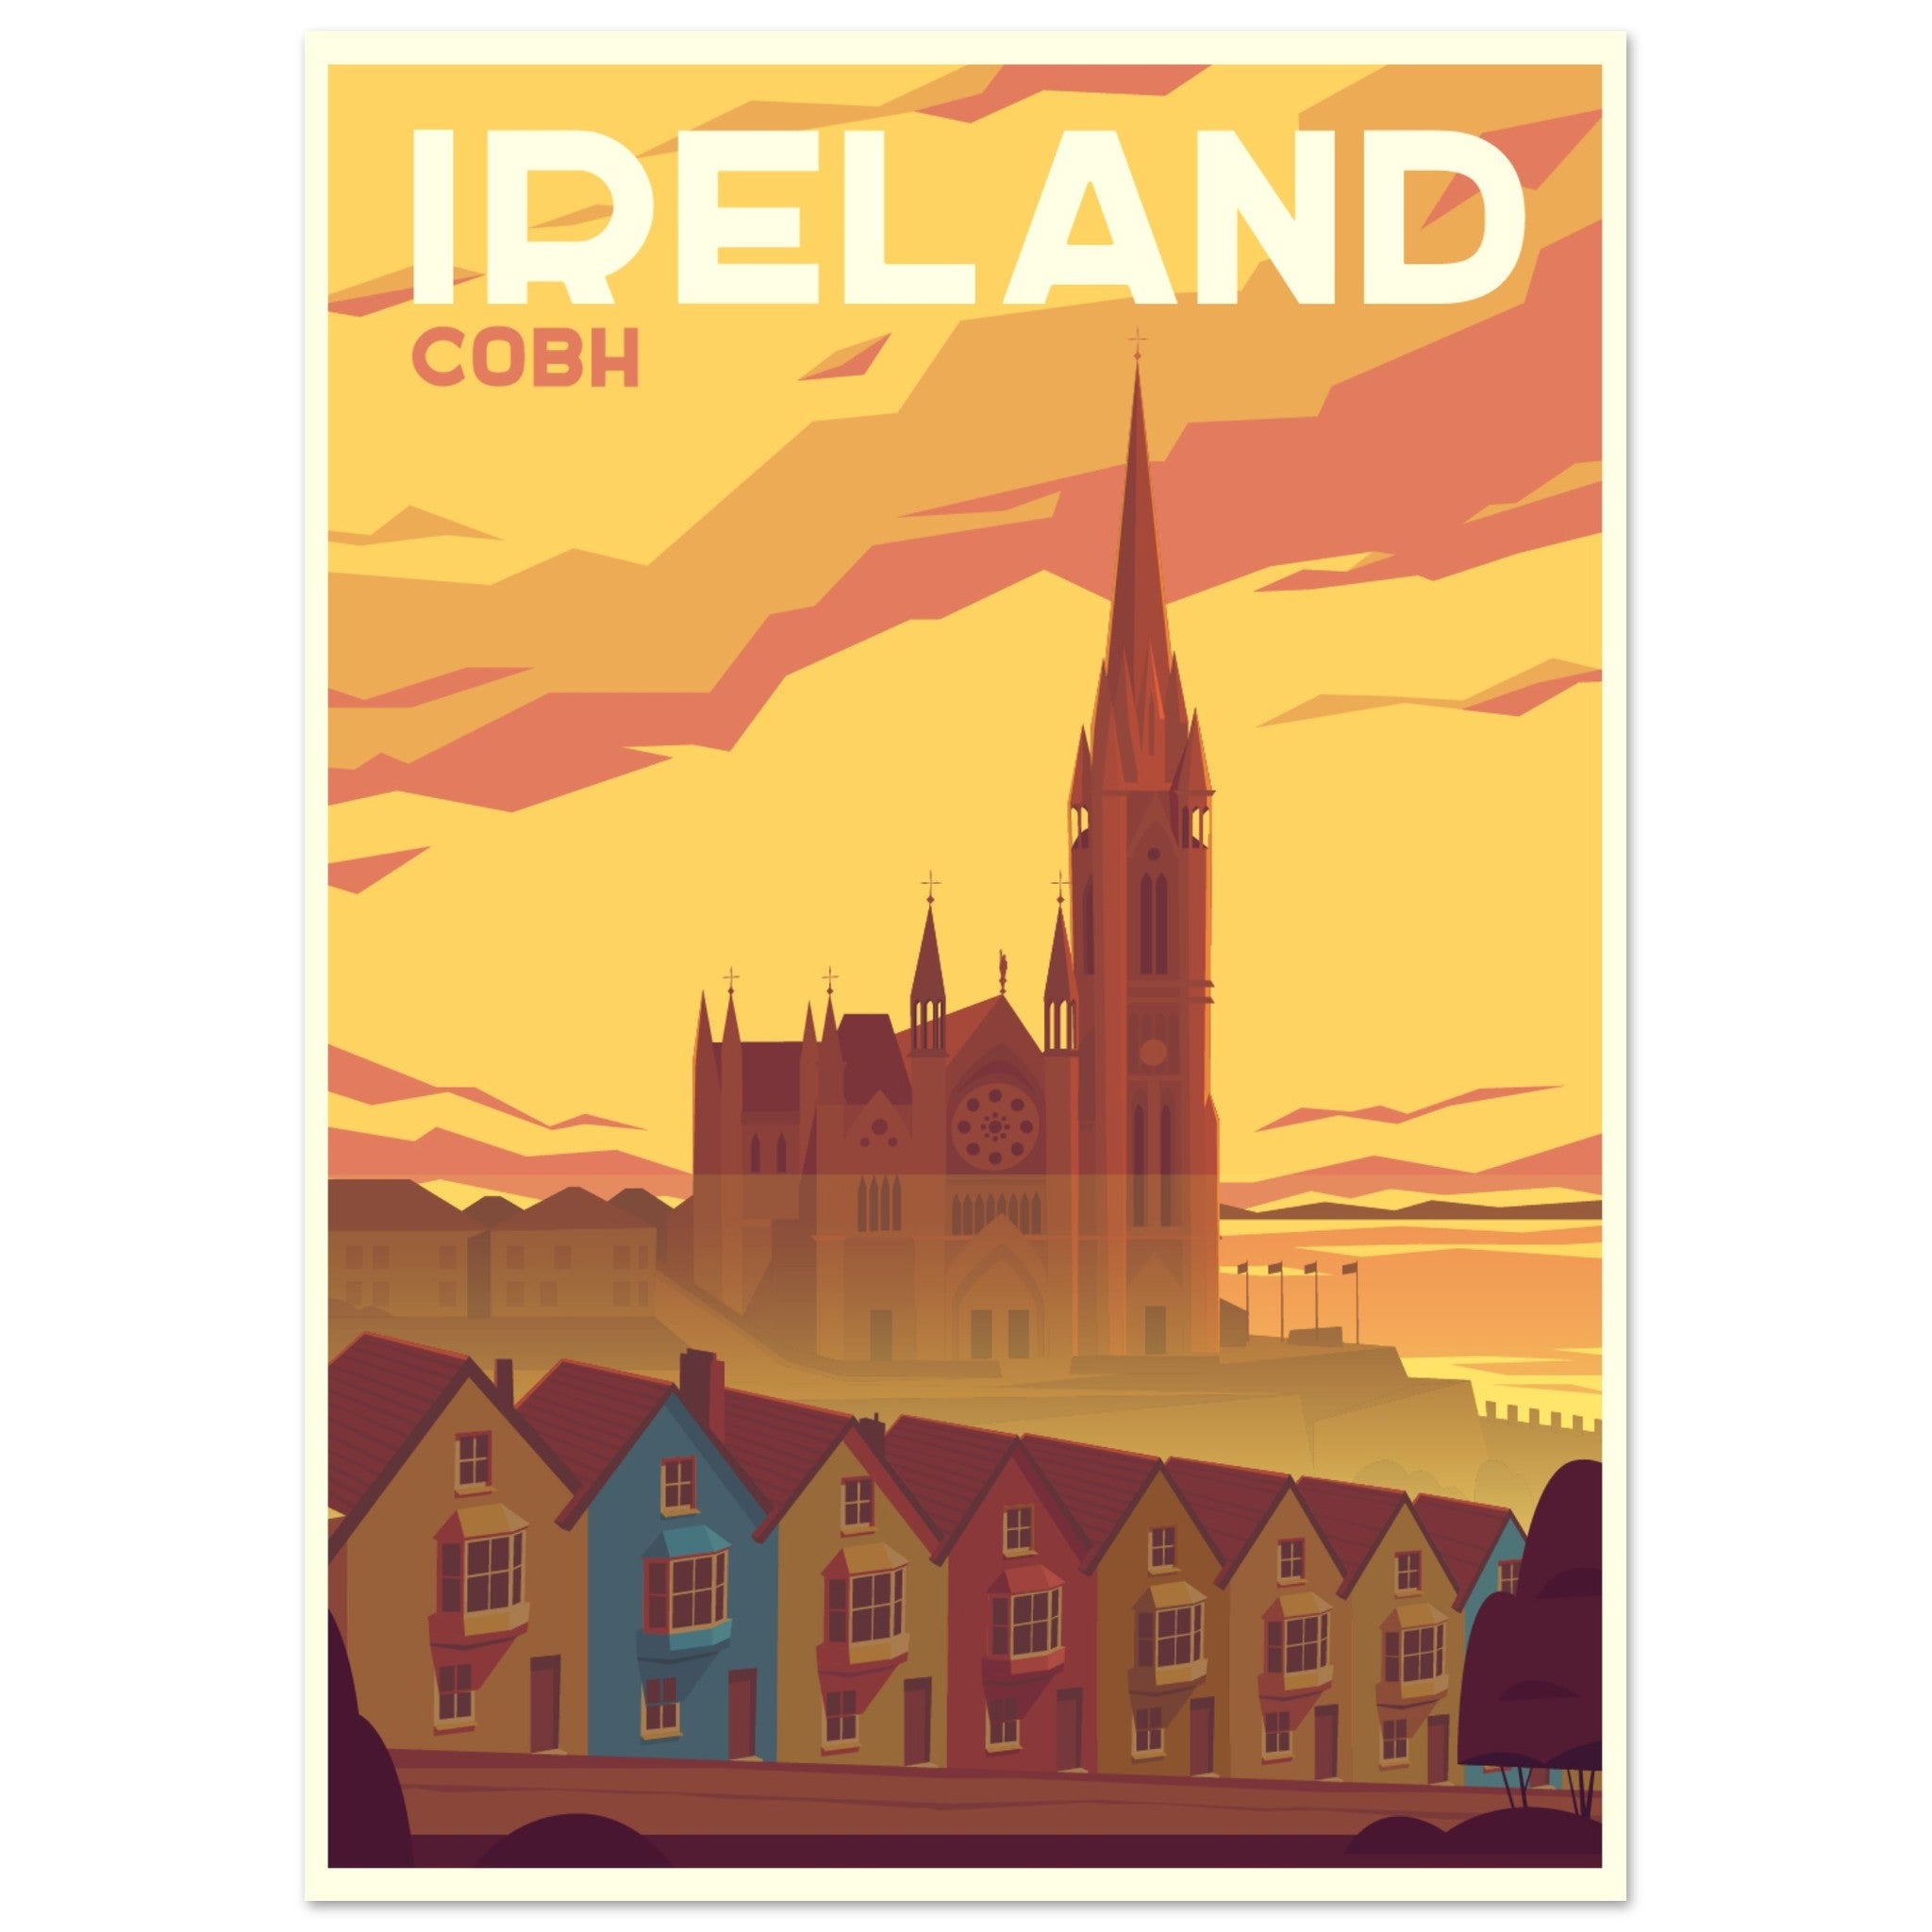 Vintage-style art print of Cobh, Cork, capturing its historic maritime charm. Ideal decor for travel lovers and those fond of retro aesthetics.